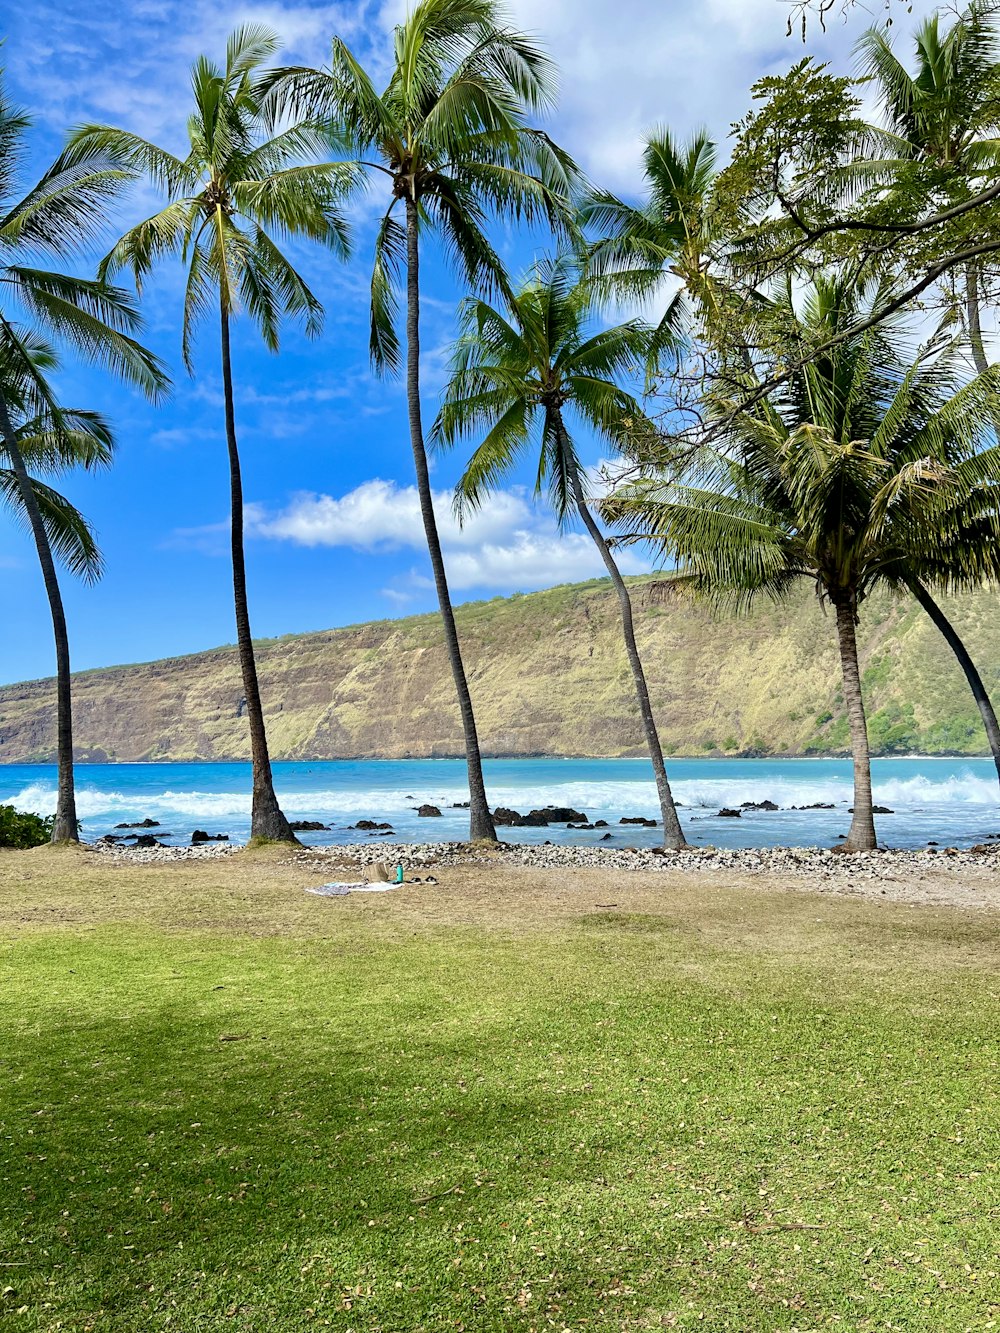 a grassy area with palm trees and the ocean in the background